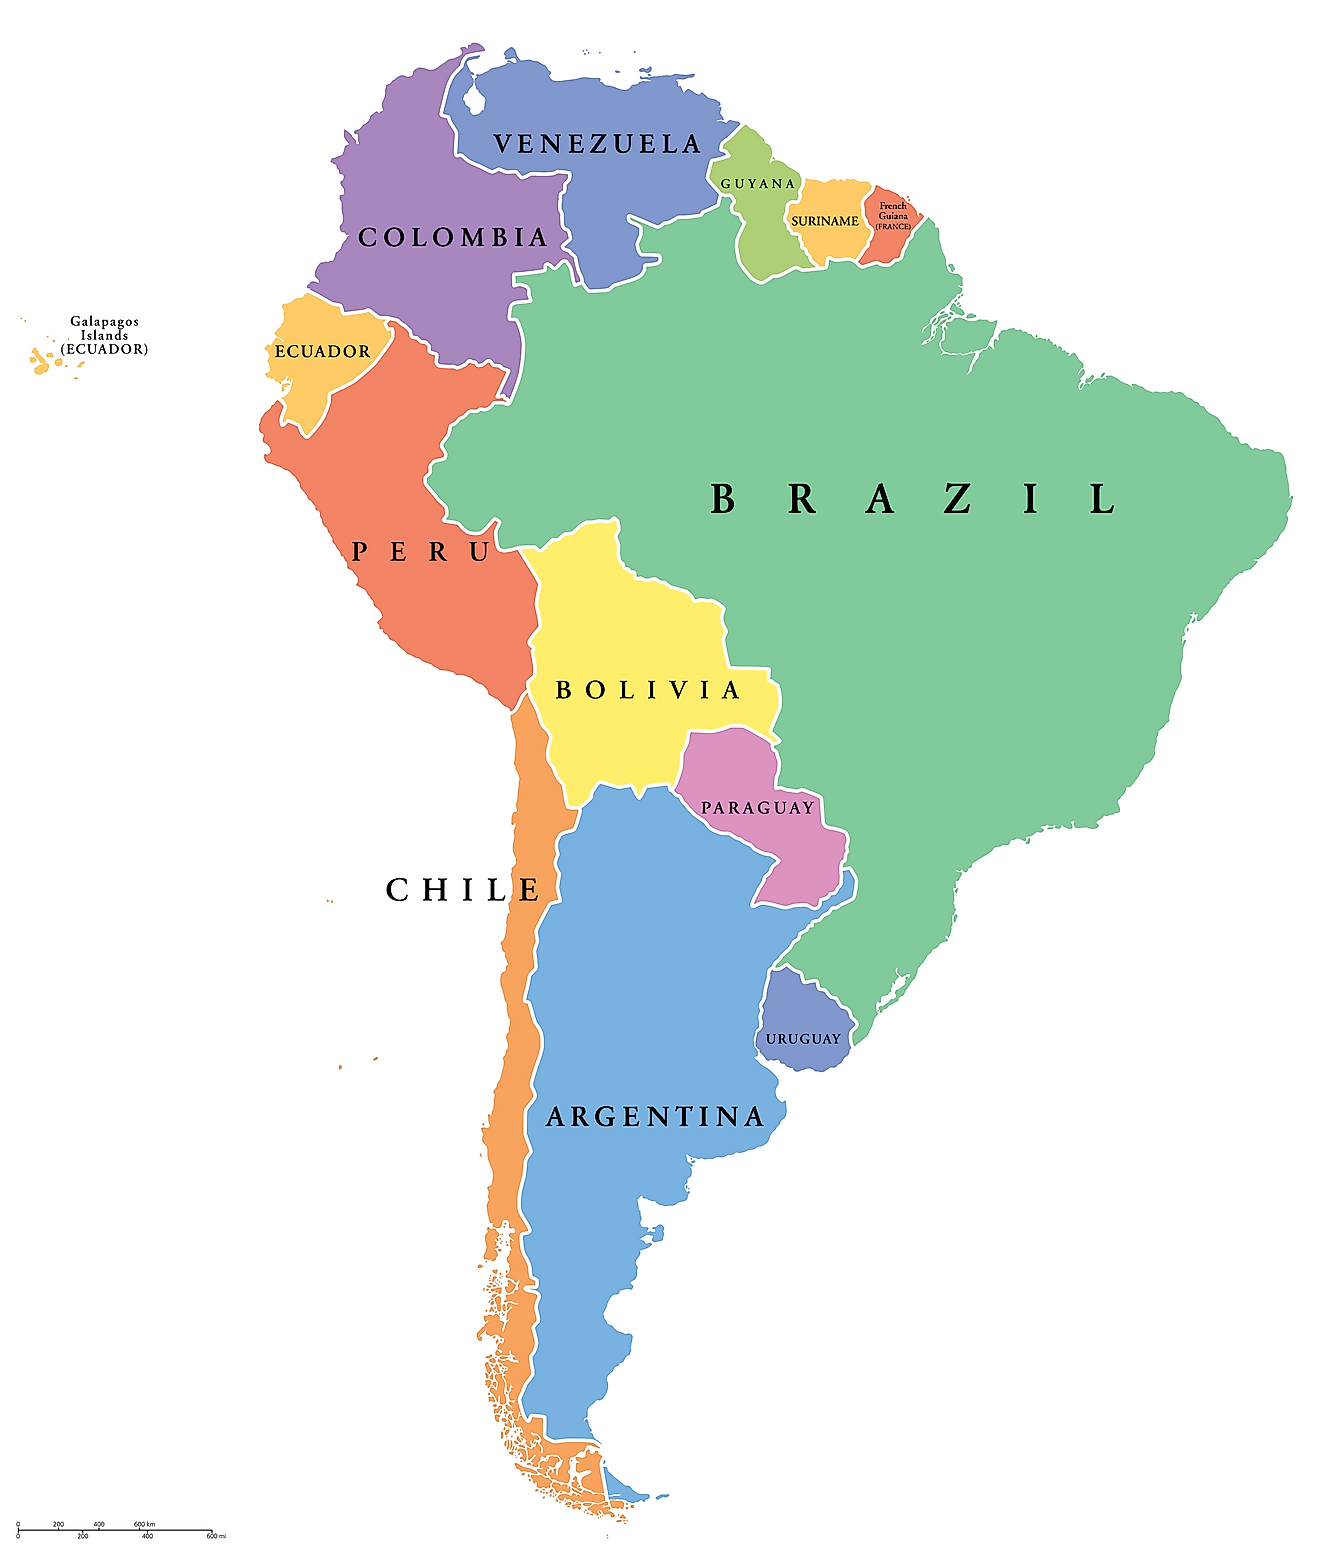 How Many Countries Are There In South America? - WorldAtlas